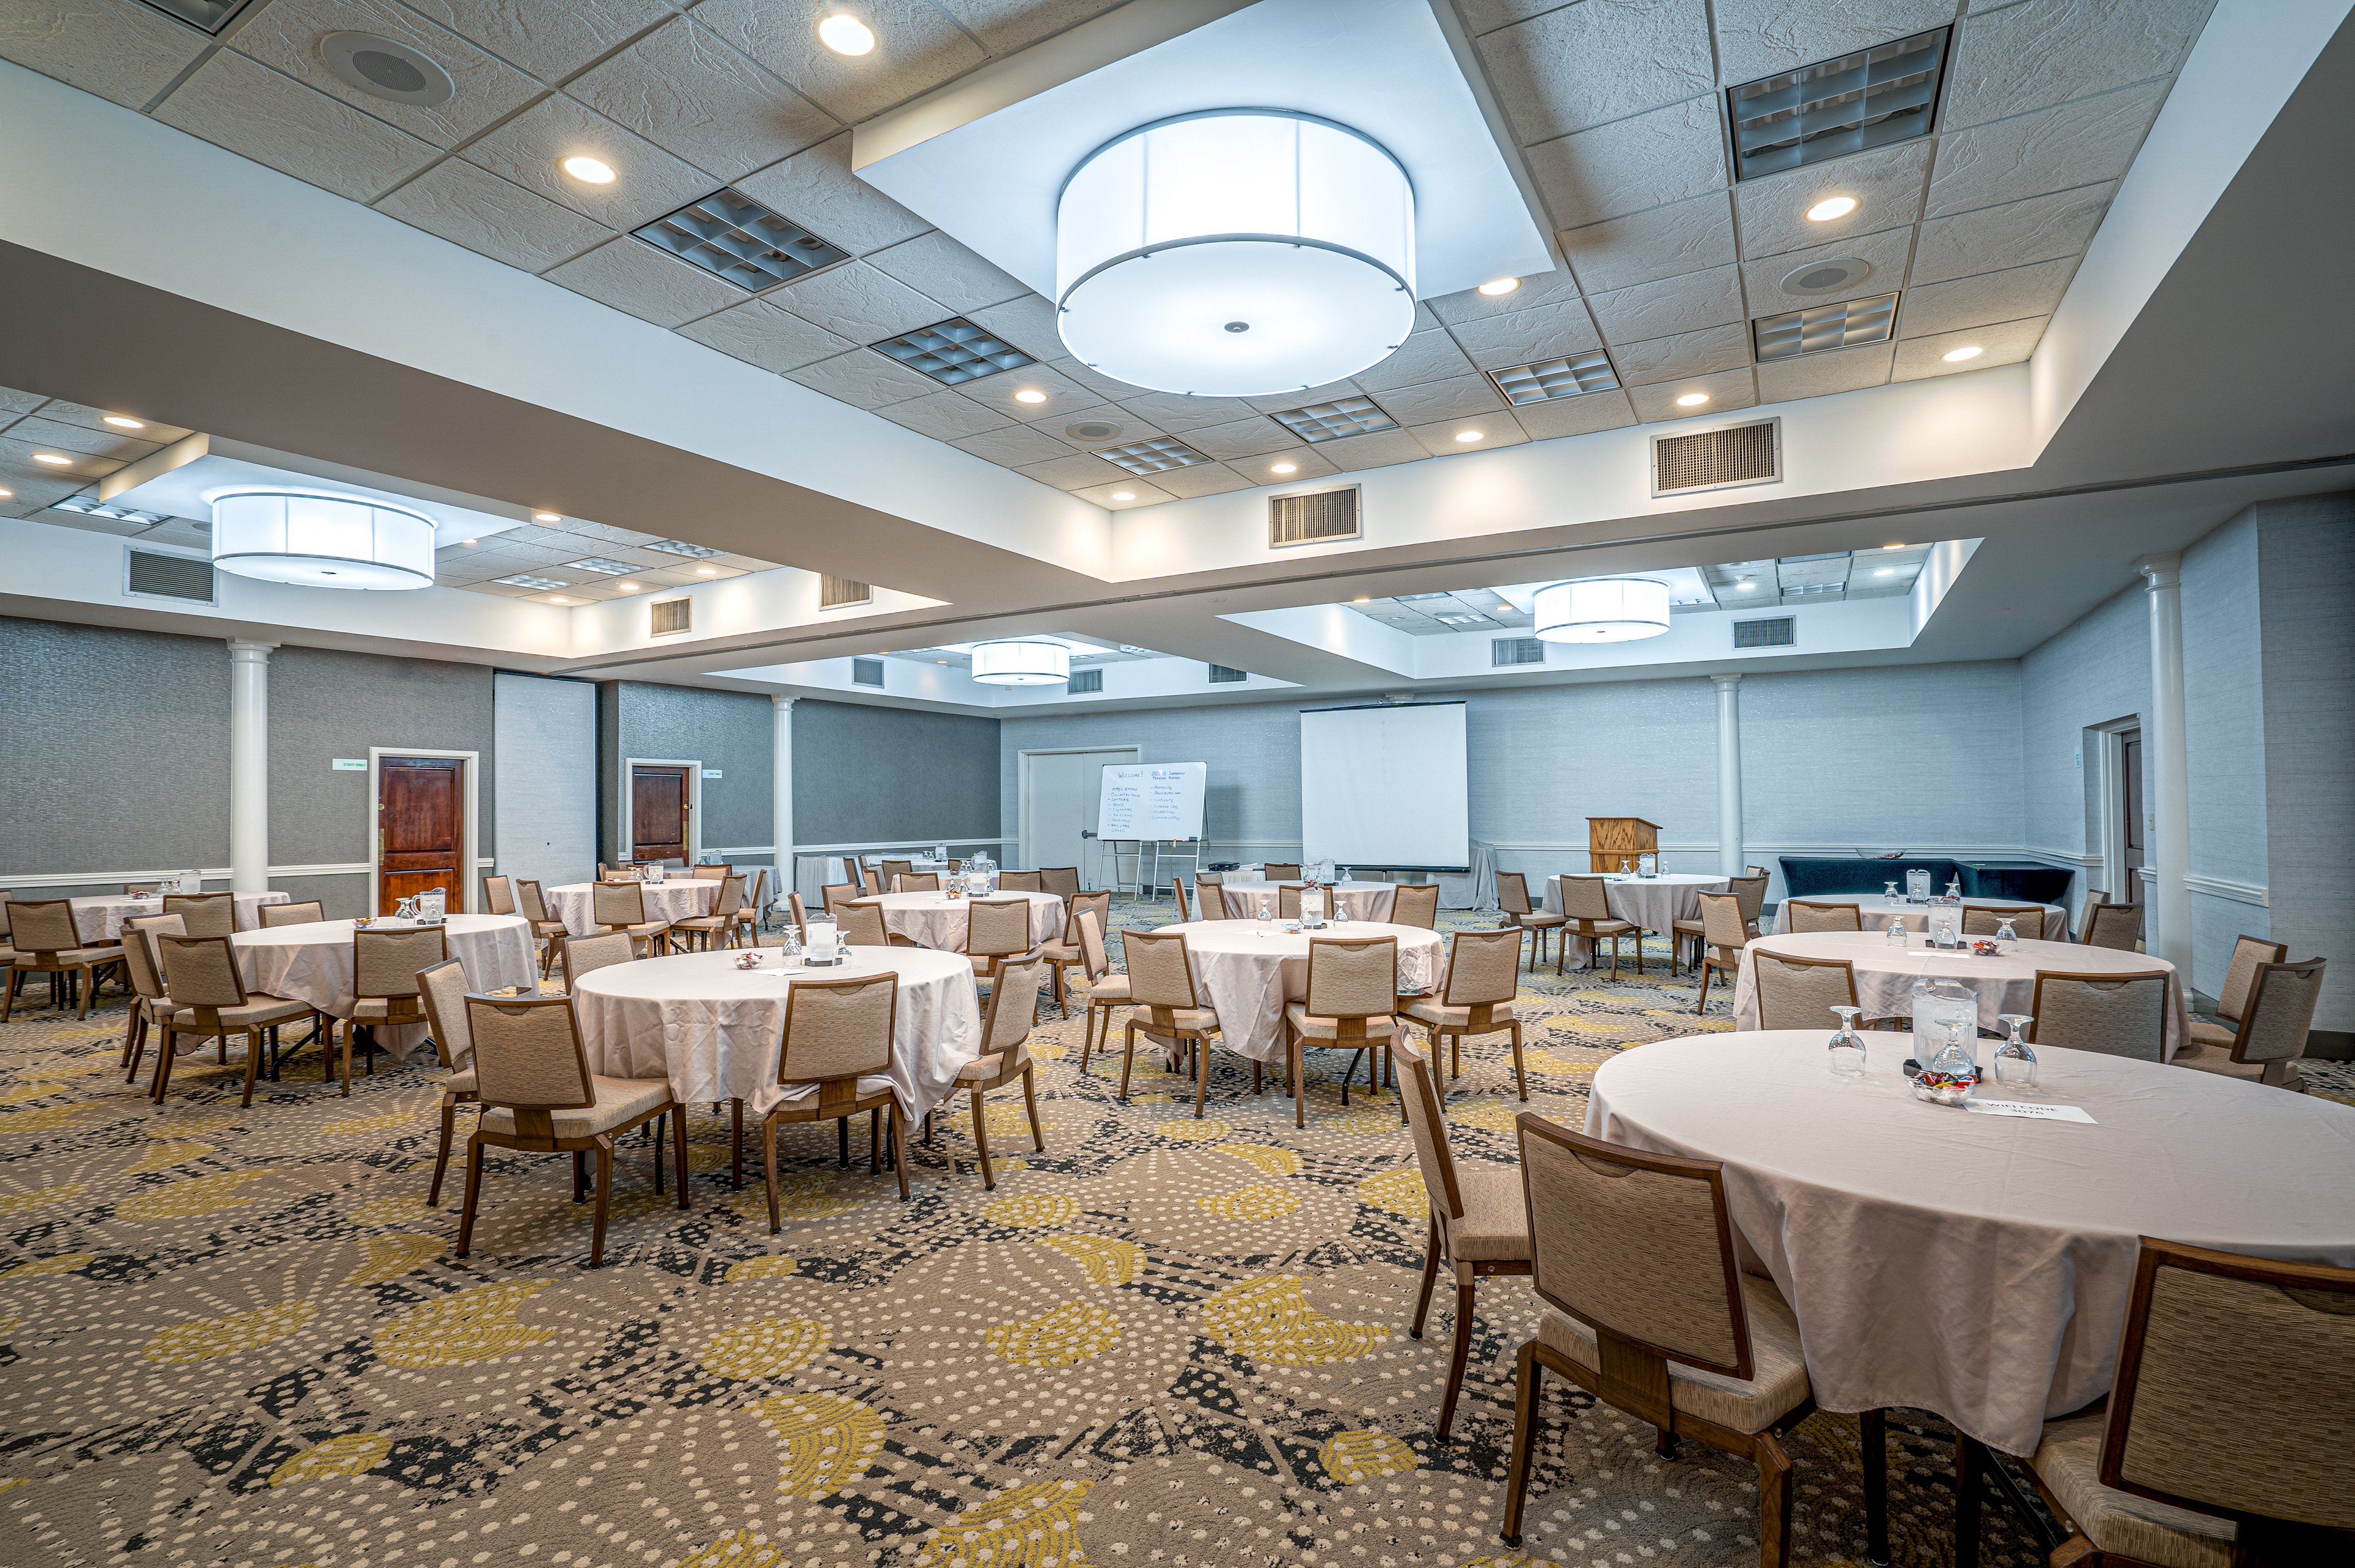 Grand Ballroom - Splits into 3 sections, 3,920 sq. ft. total space